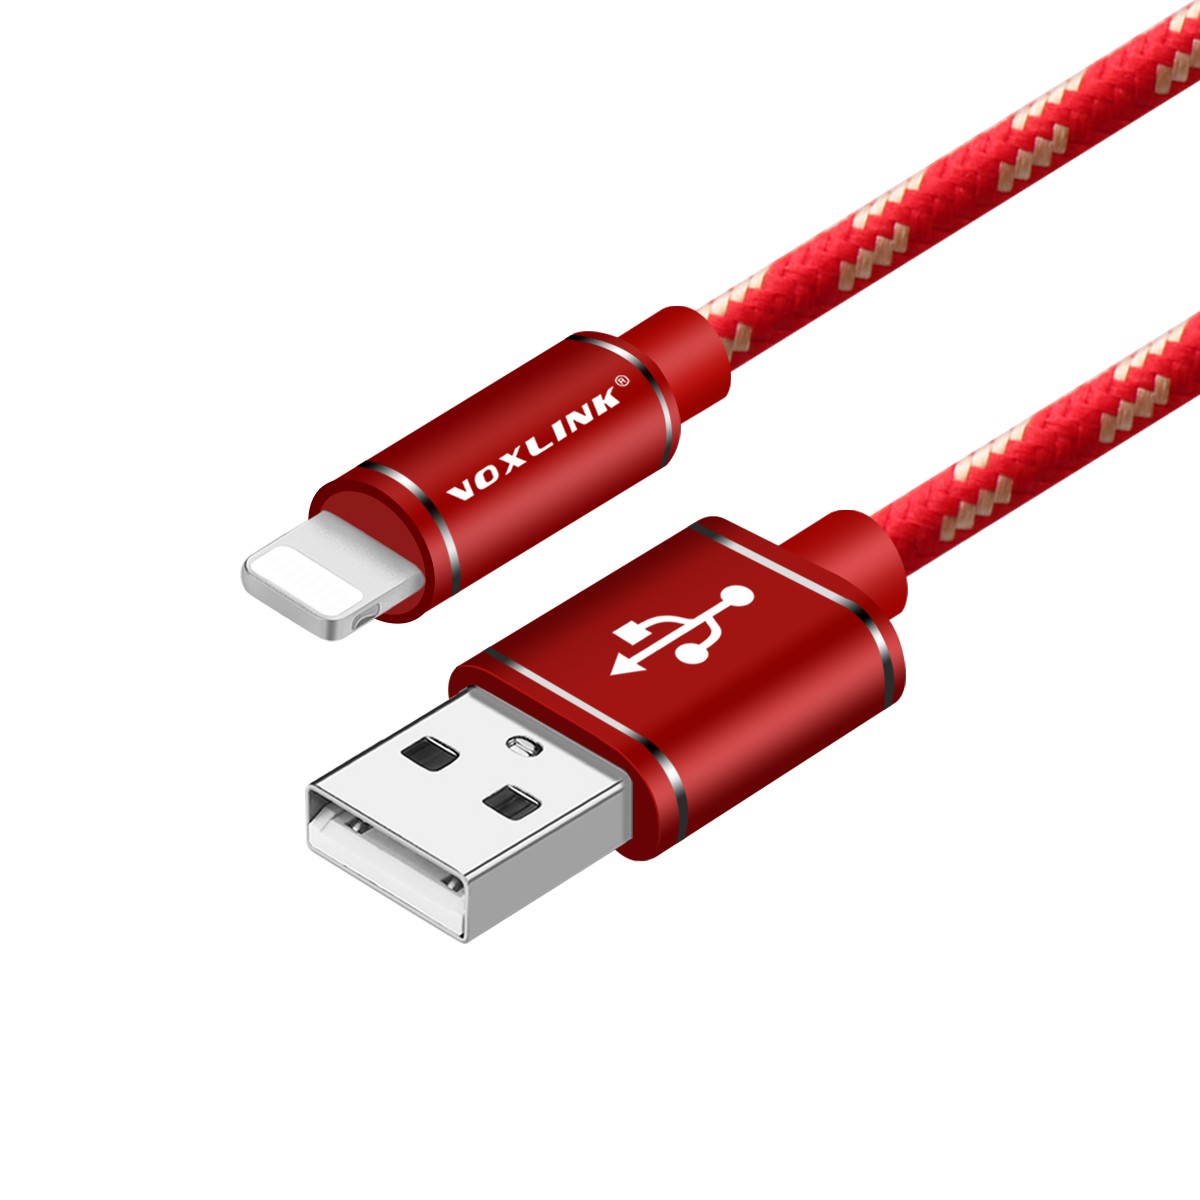 VOXLINK 8pin to USB Cable Fast Charger Adapter Original USB Cable For iphone 7 6 s plus 5 5s ipad mini Mobile Phone Cables red 1m